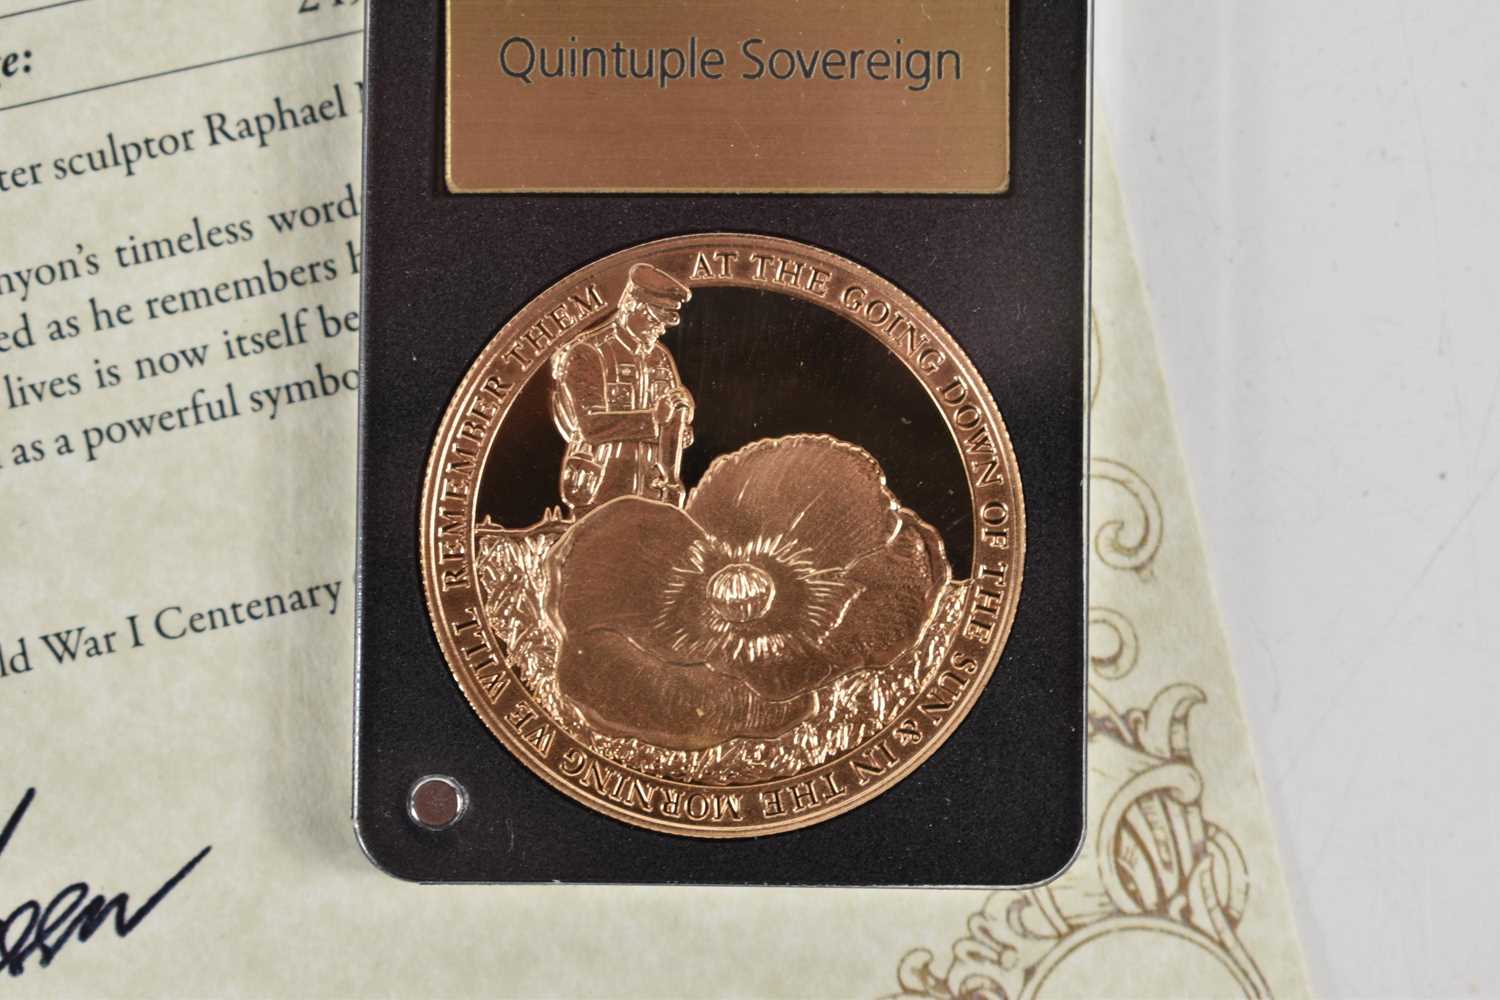 The World war I Centenary Quintuple 22ct Gold Proof Sovereign, issued by the London Mint in 2018, - Image 3 of 3